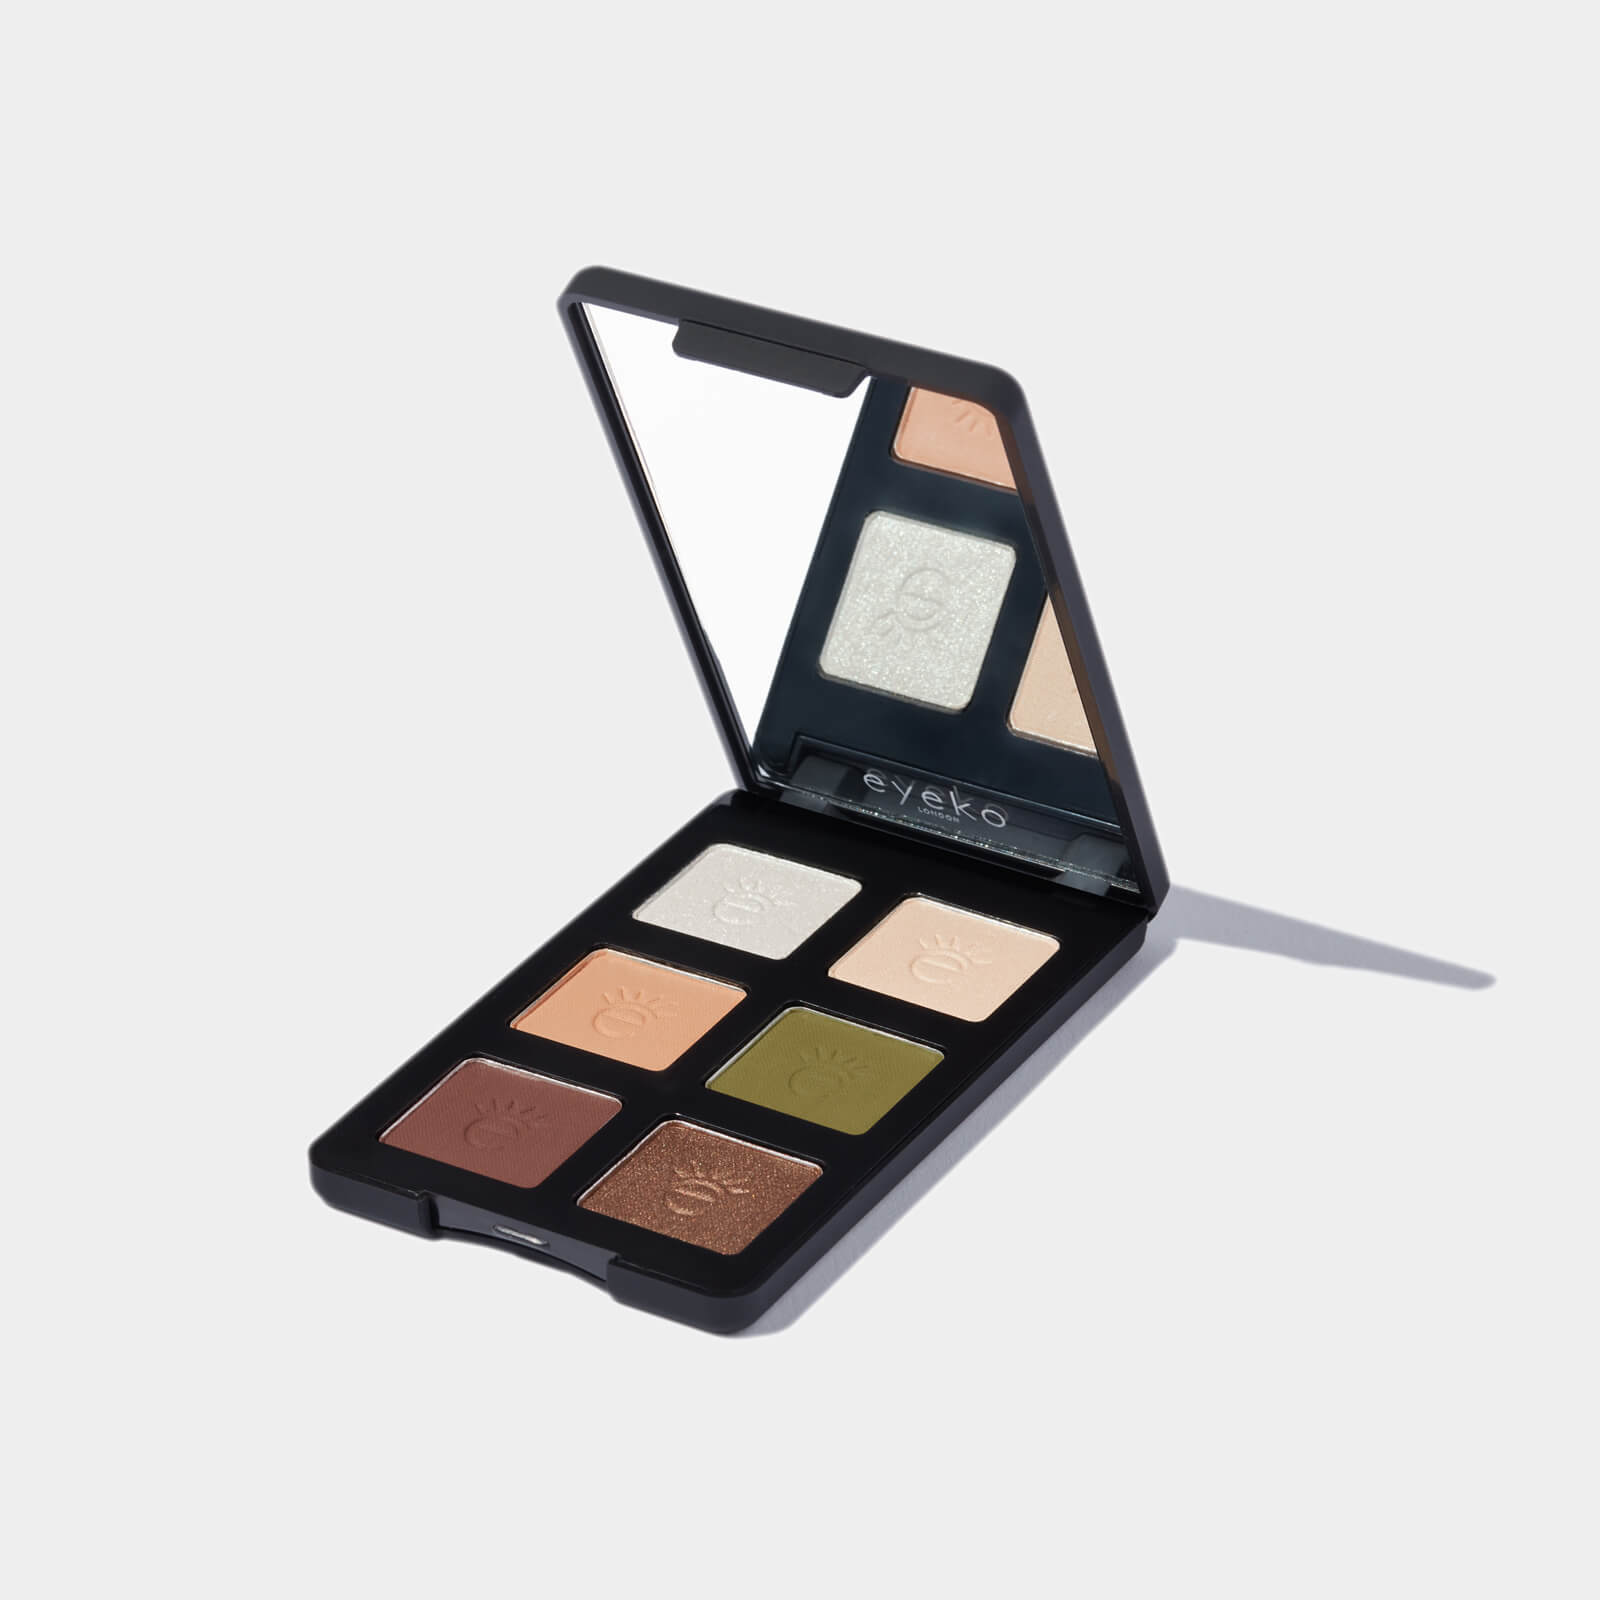 Image of Palette Ombretti Limitless Eyeko 1